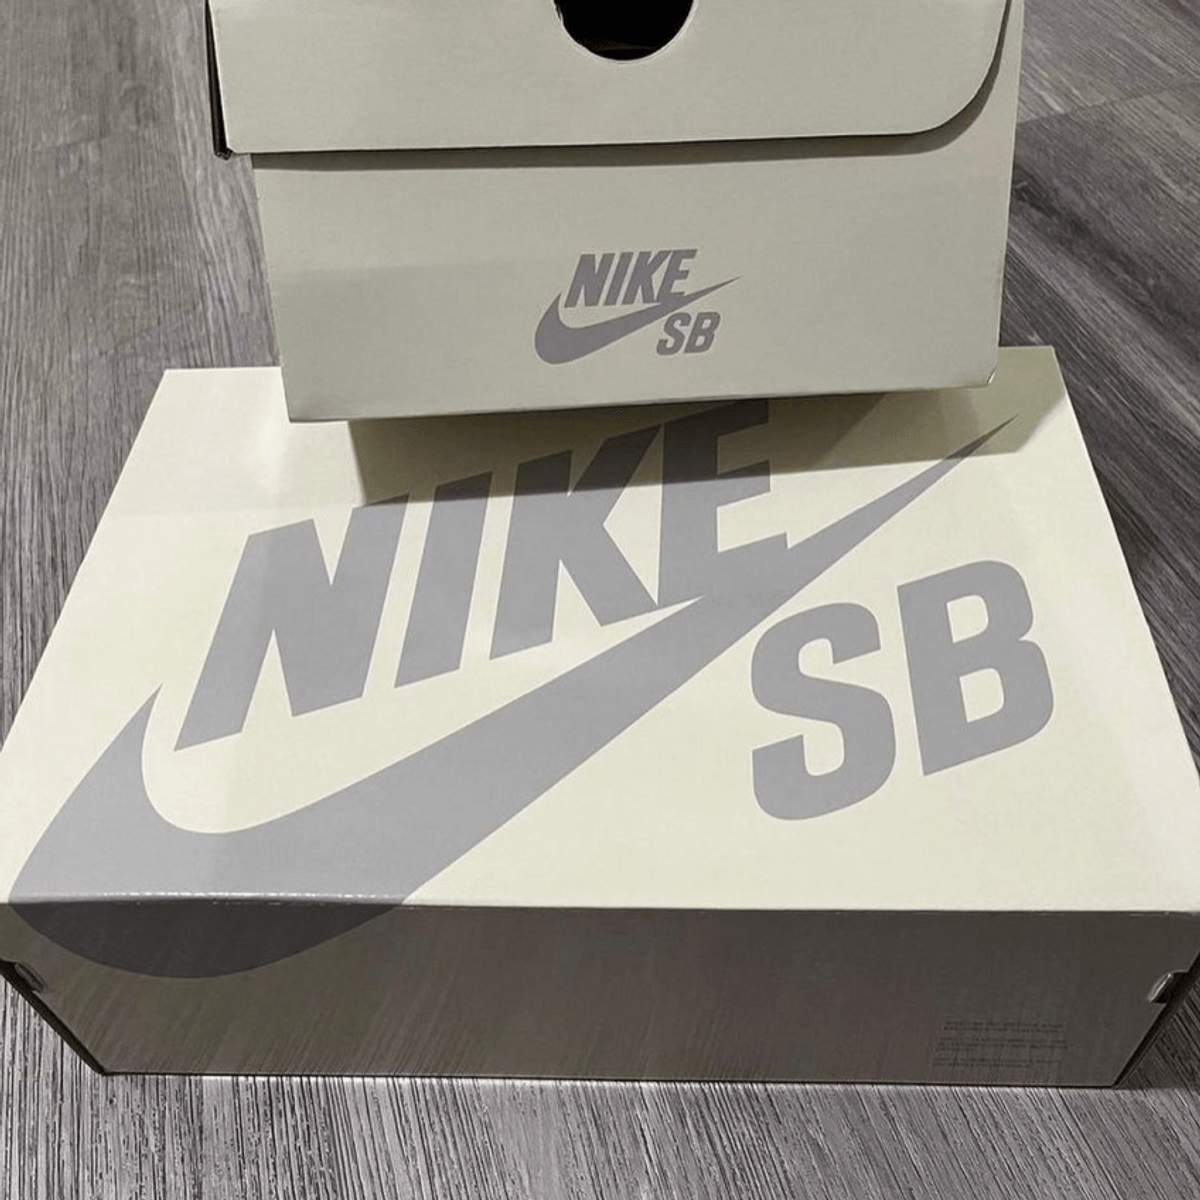 The New Nike SB Quickstrike Boxes Have Arrived